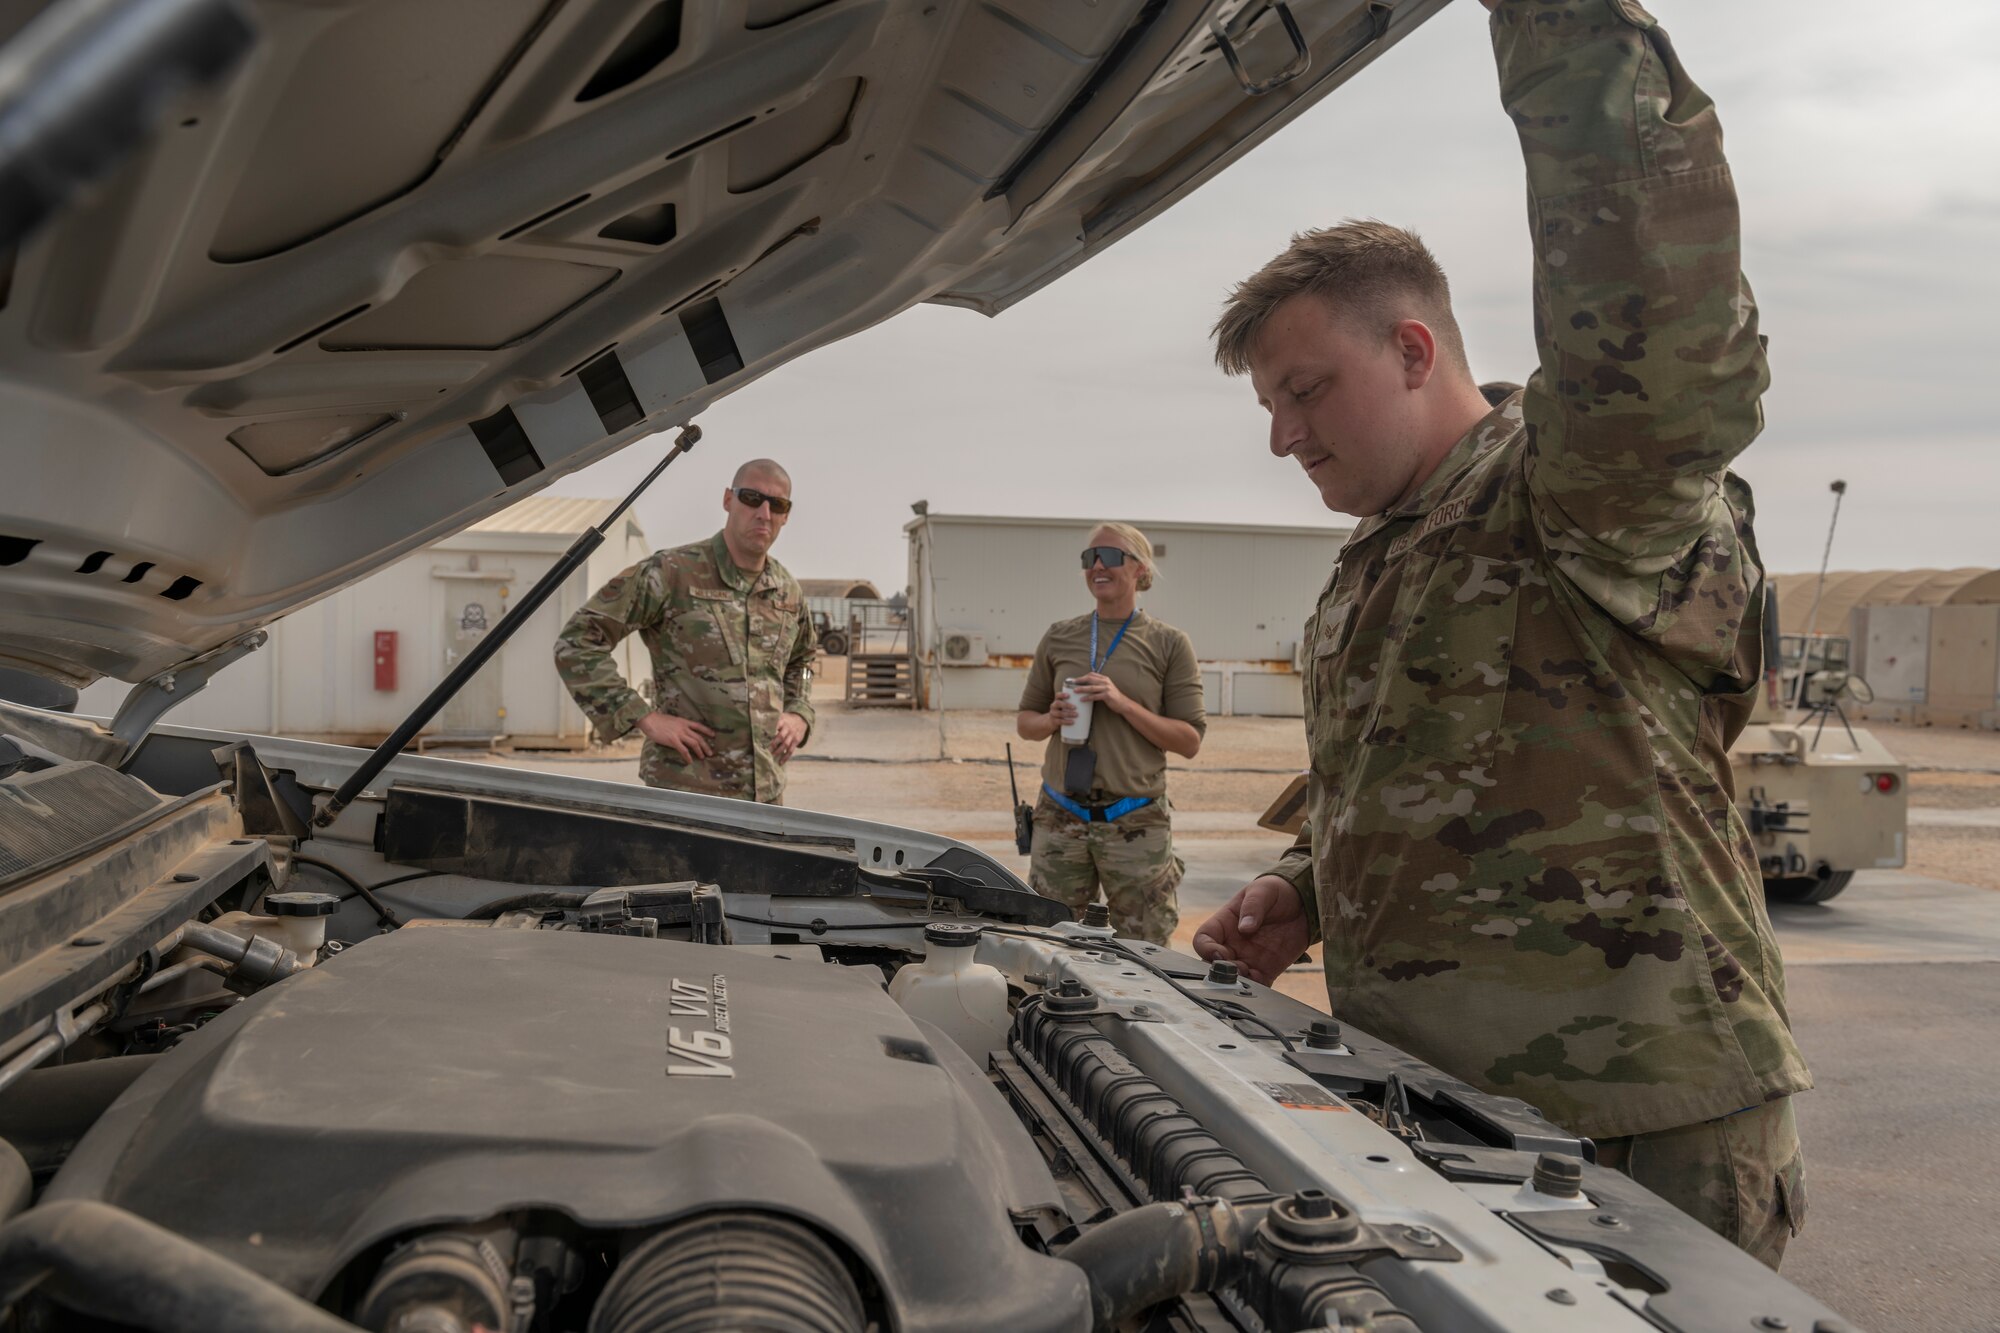 U.S. Air Force Senior Airman Christopher Hites, right, 55th Expeditionary Fighter Generation Squadron support technician, shows Chief Master Sgt. Sean Milligan, 332nd Air Expeditionary Wing command chief, left, how to perform a vehicle inspection